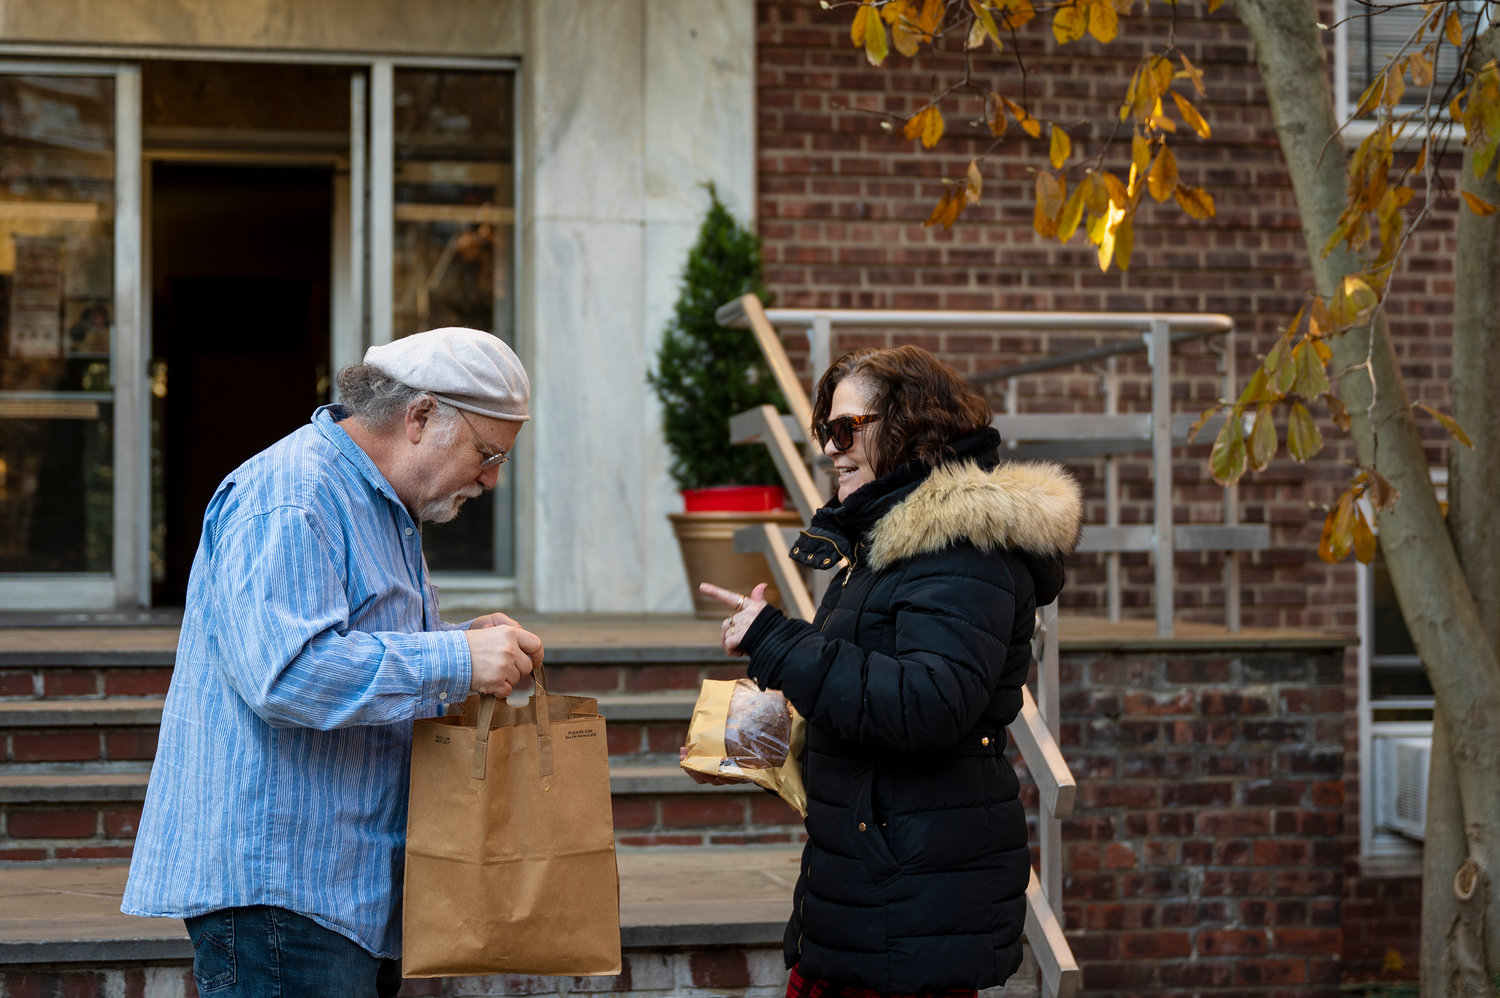 Arnie Adler swapped one of his sourdough breads with his neighbor for her own homemade treat just in time for Thanksgiving. While Adler focused on bartering when he first started baking earlier this year, he’s now selling many more loaves than he’s trading.